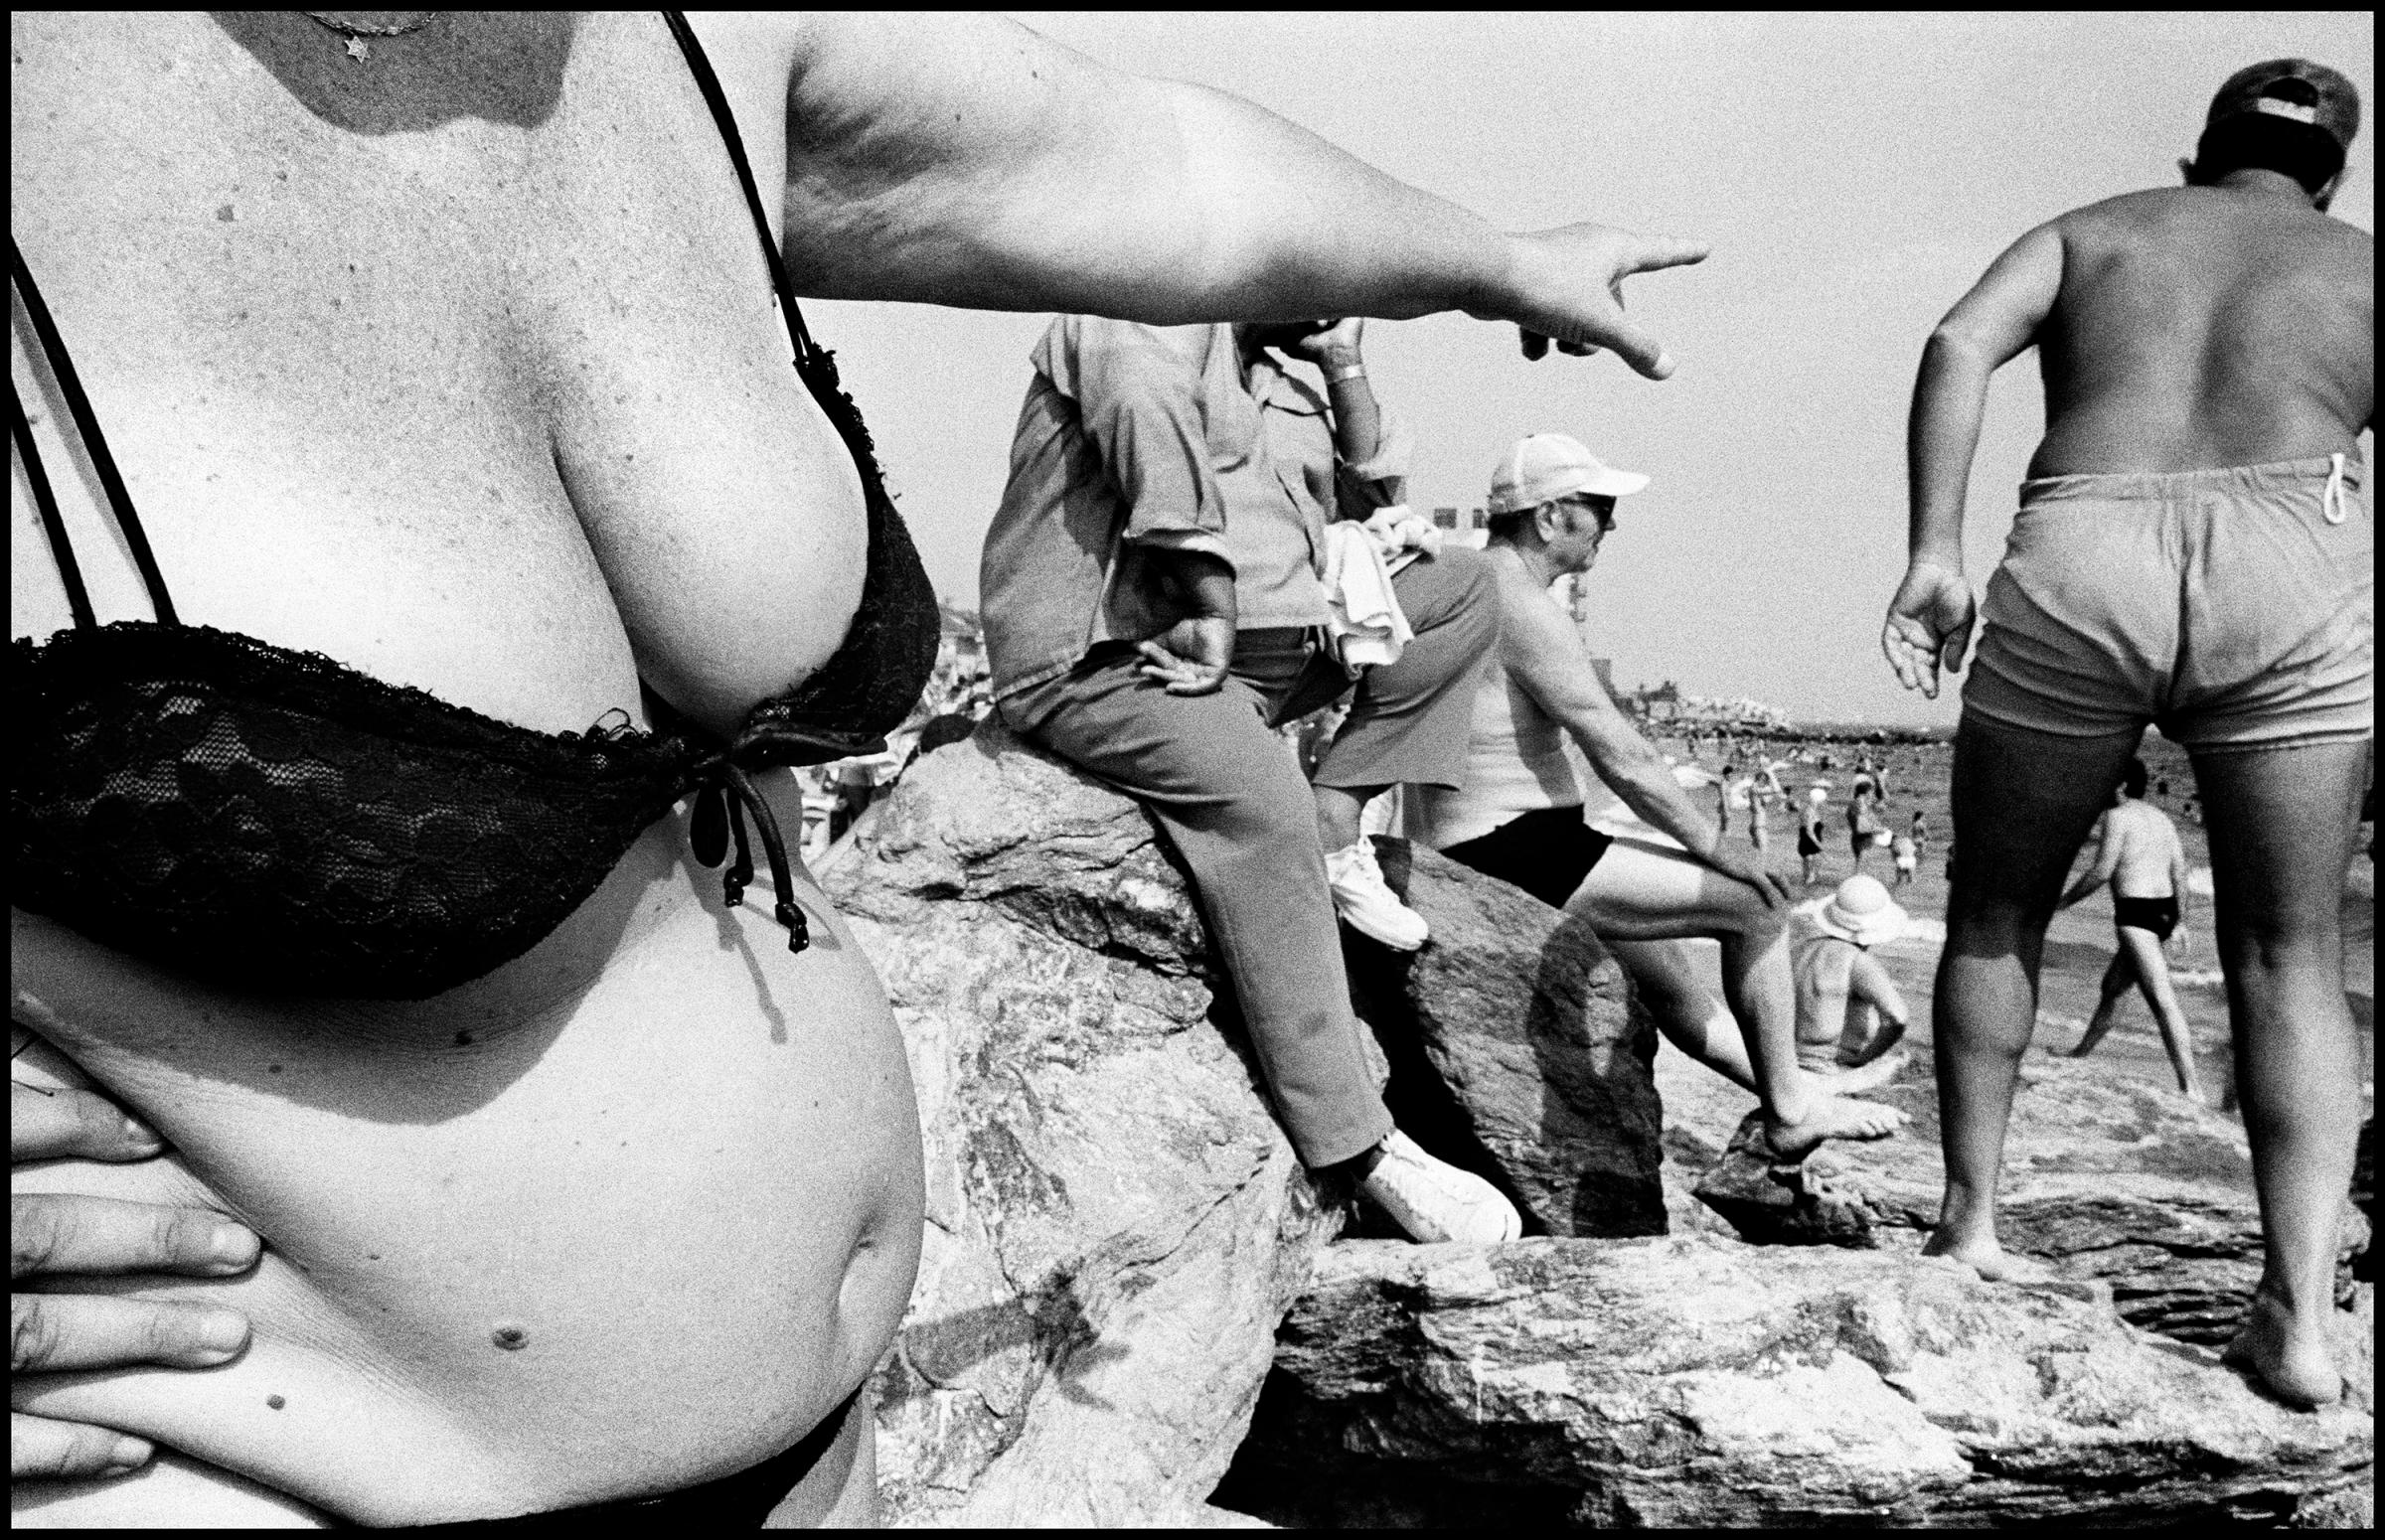 USA. NYC. Coney Island. 1982. Woman on beach pointing at a man near her."The reason is simple—I do long personal essays that are self-assigned."